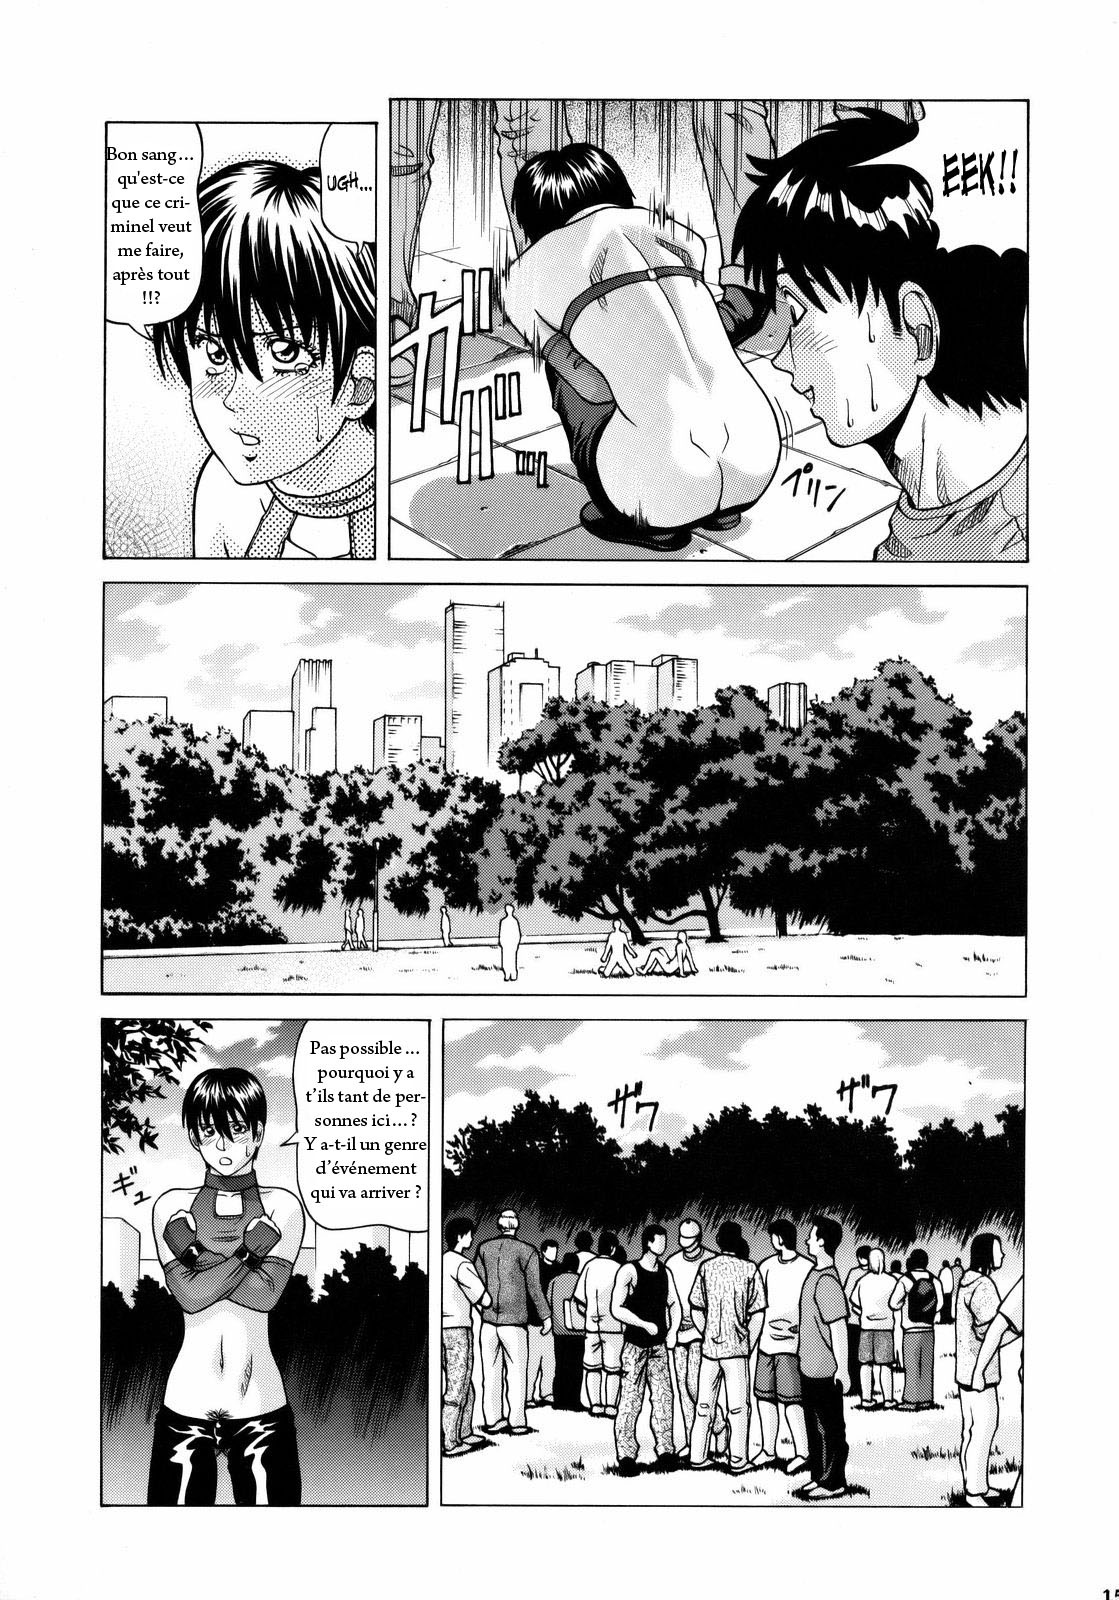 (C75) [Human High-Light Film (Jacky Knee-san)] Rebecca Chambers (Resident Evil) [French] page 15 full